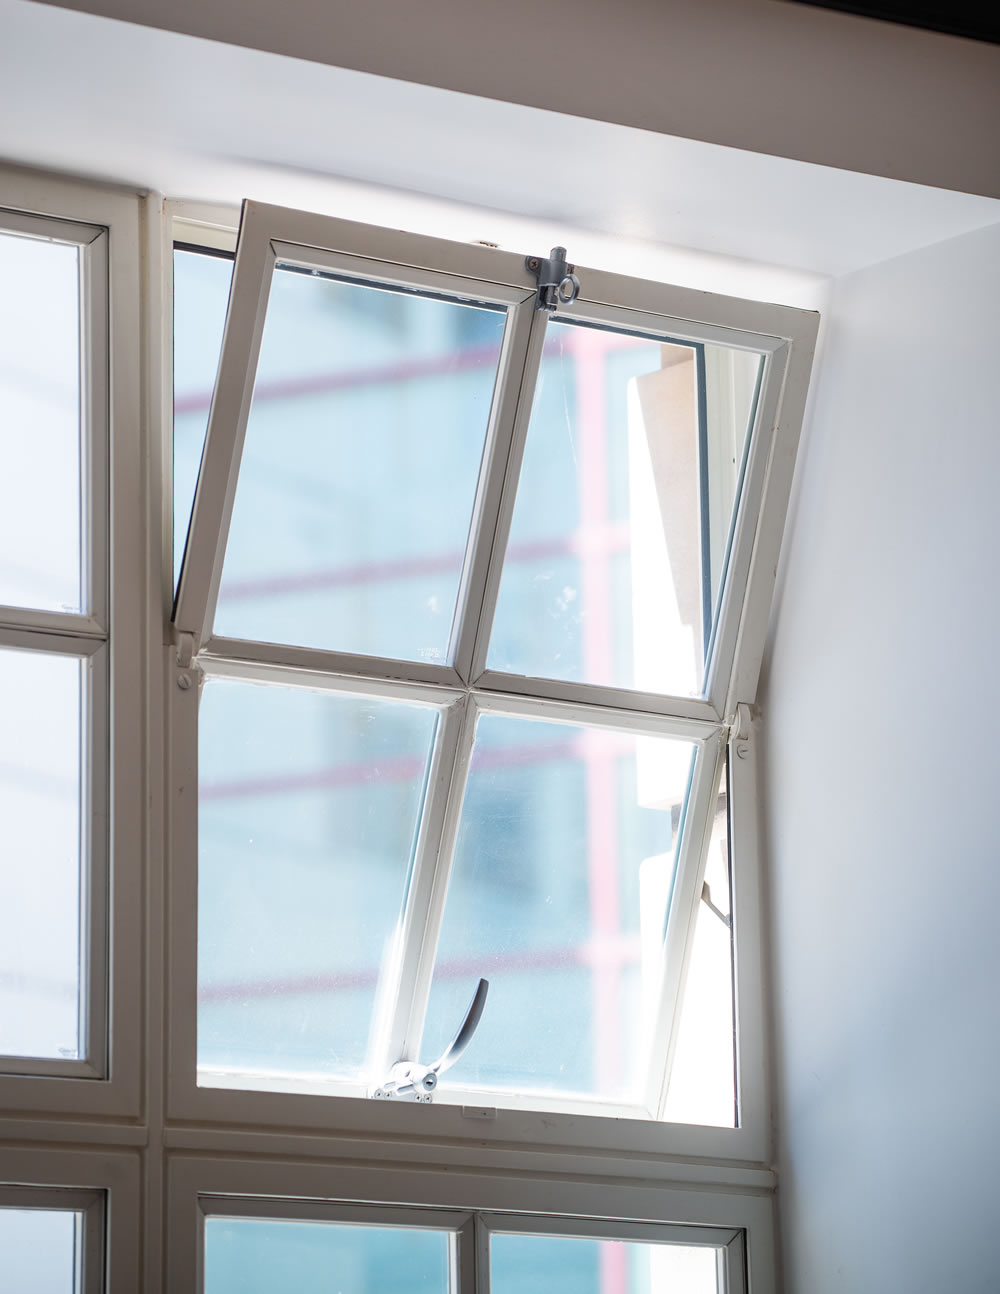 Opening a steel window helps reduce condensation